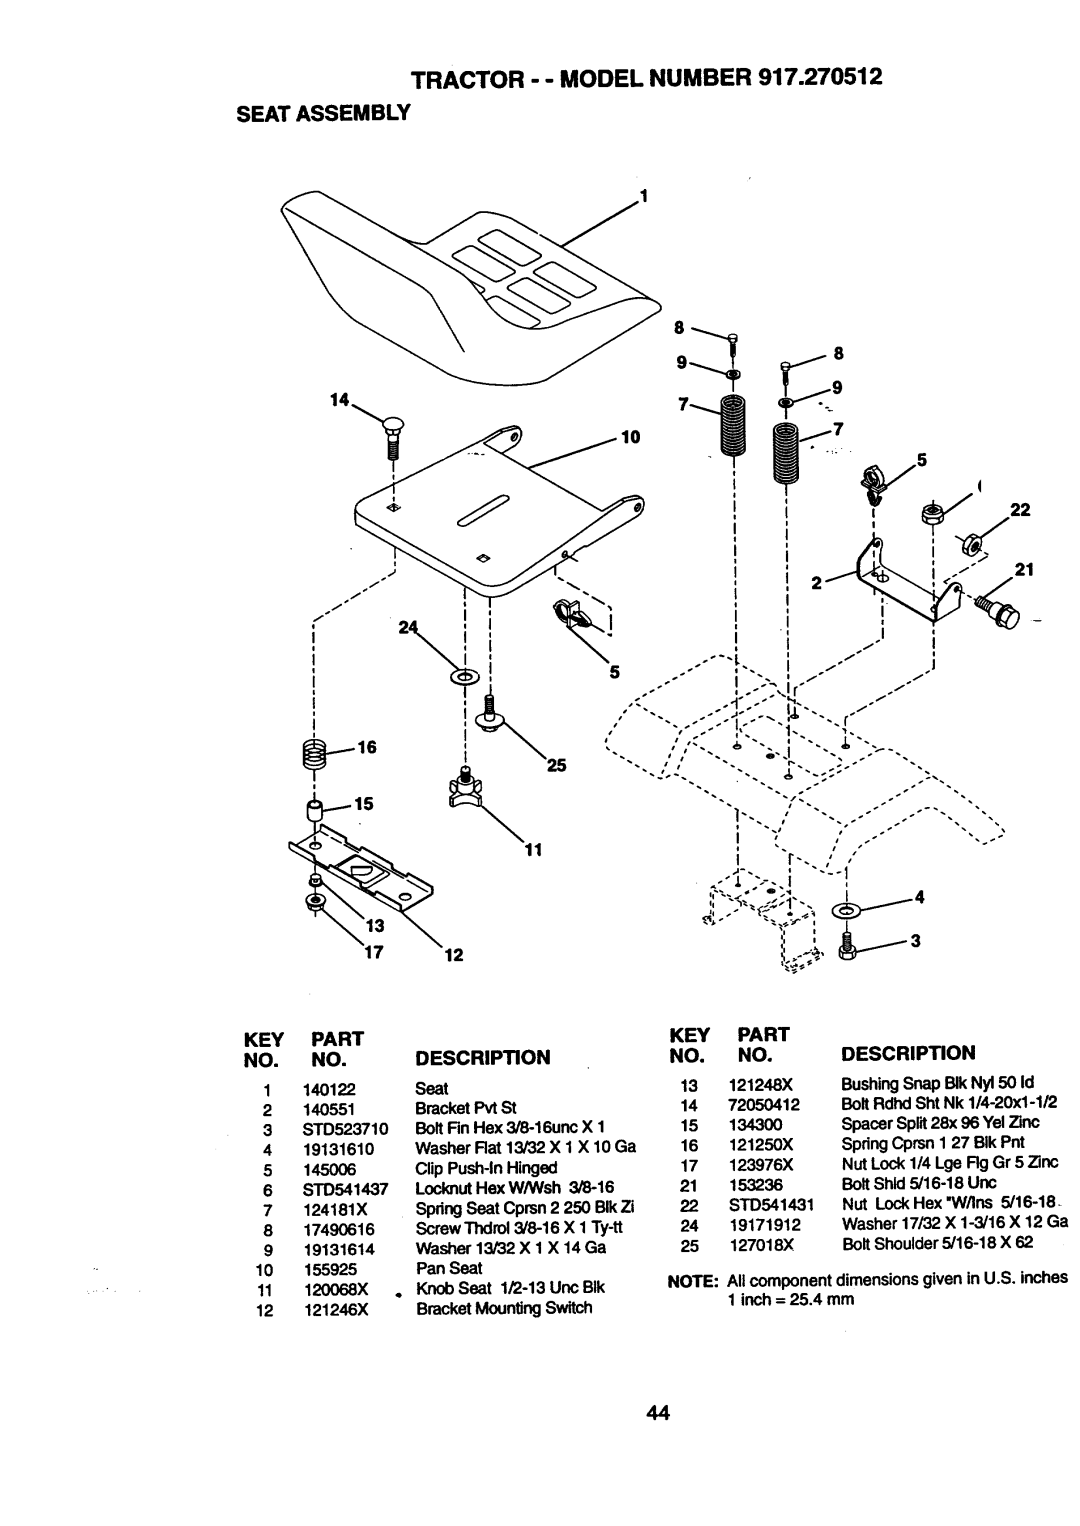 Craftsman 917.270512 owner manual Tractor - - Model Number Seat Assembly 